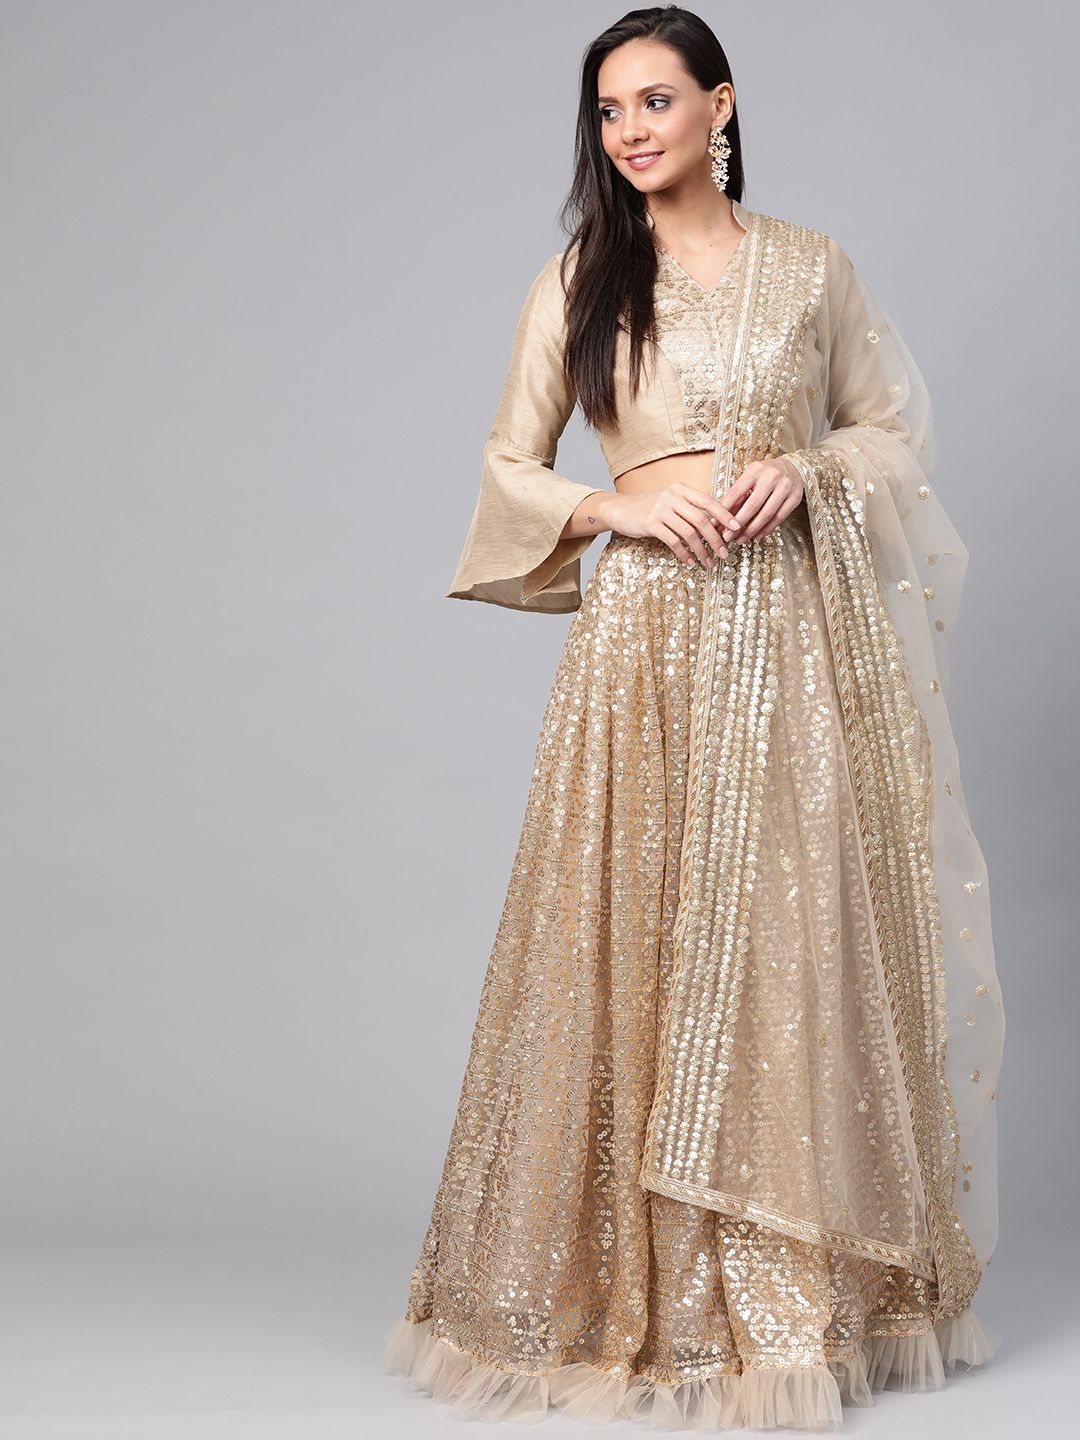 SHOPGARB Golden Sequined Semi-Stitched Lehenga & Unstitched Blouse with Dupatta Price in India